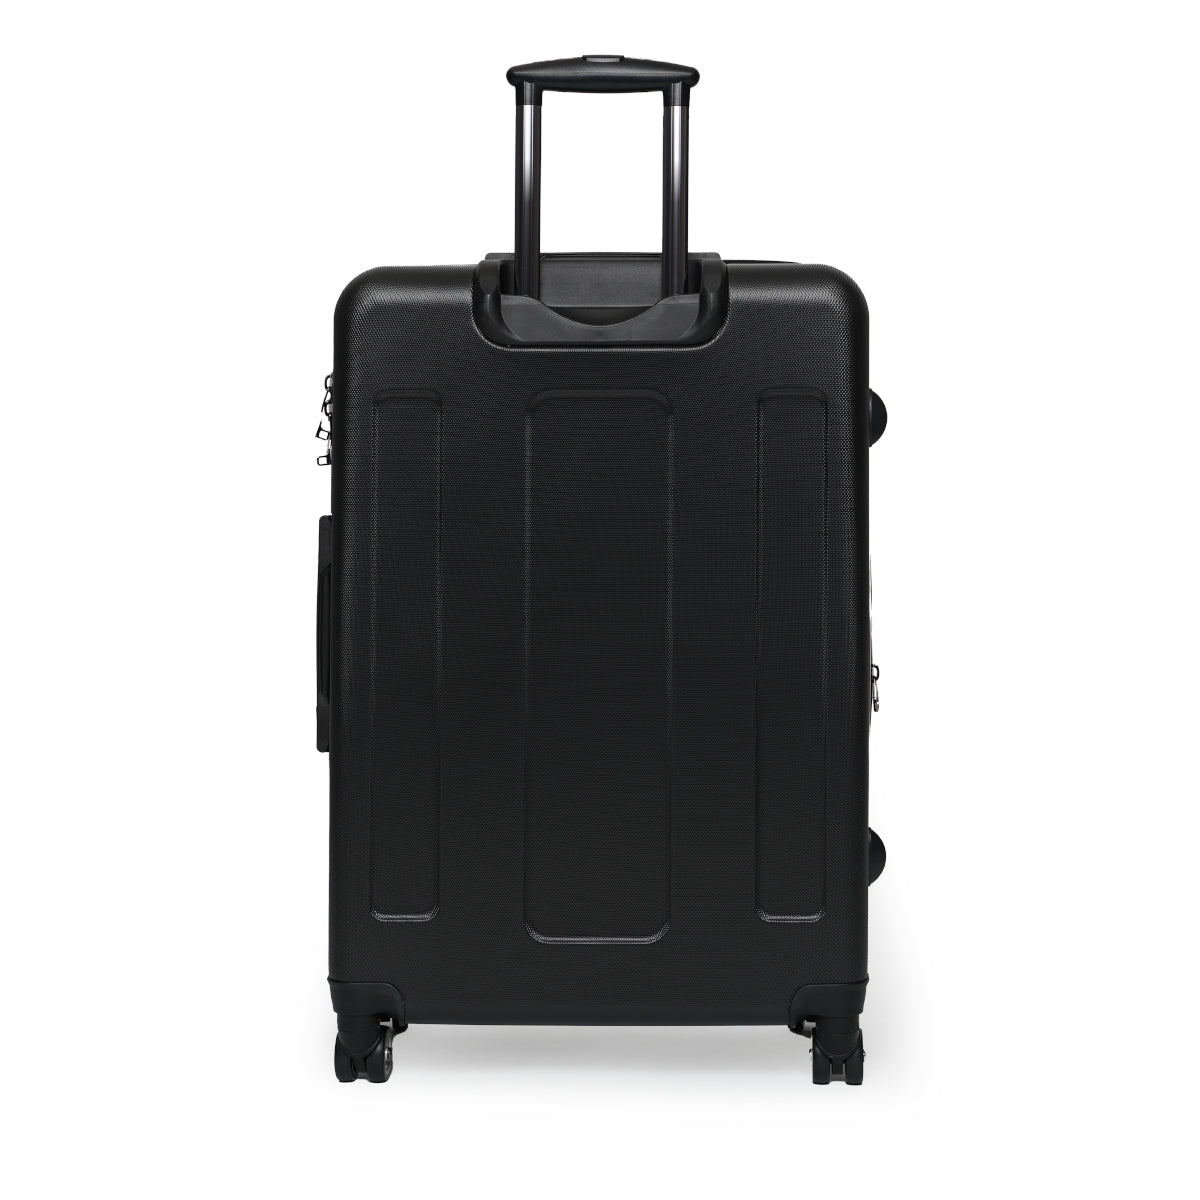 Getrott The Roots Things Fall Apart 1999 Black Cabin Suitcase Inner Pockets Extended Storage Adjustable Telescopic Handle Inner Pockets Double wheeled Polycarbonate Hard-shell Built-in Lock